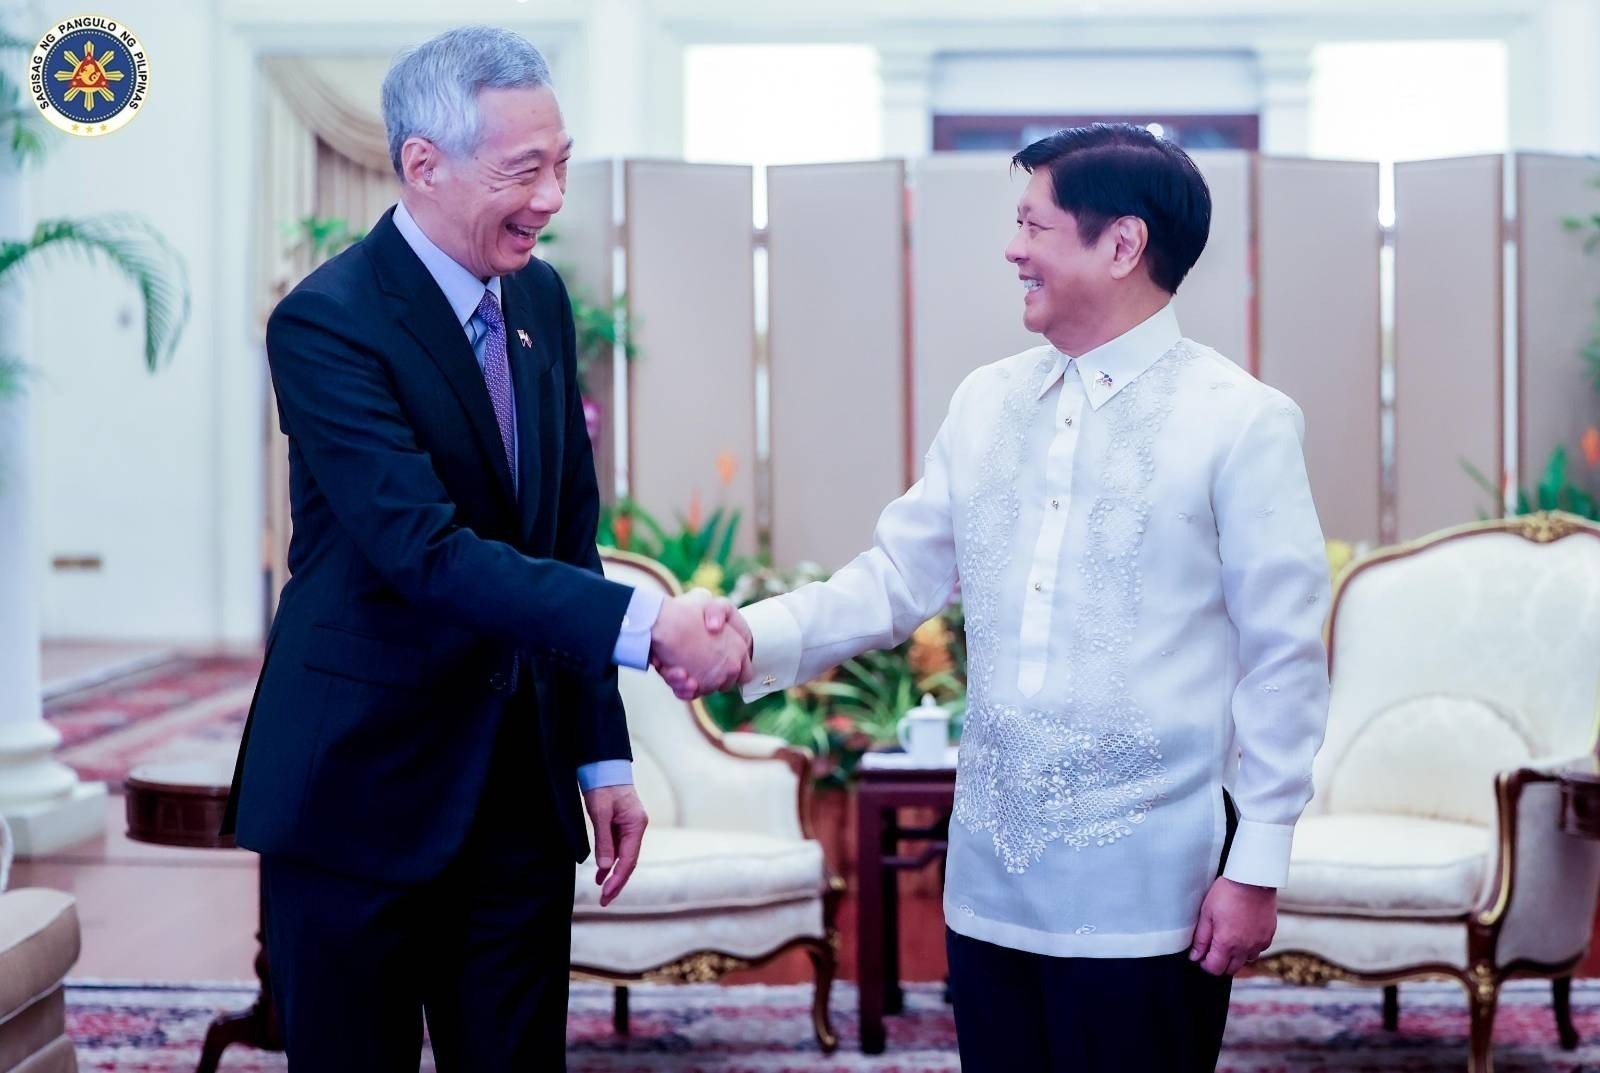 PBBM and Singapore Prime Minister Lee Hsien Loong